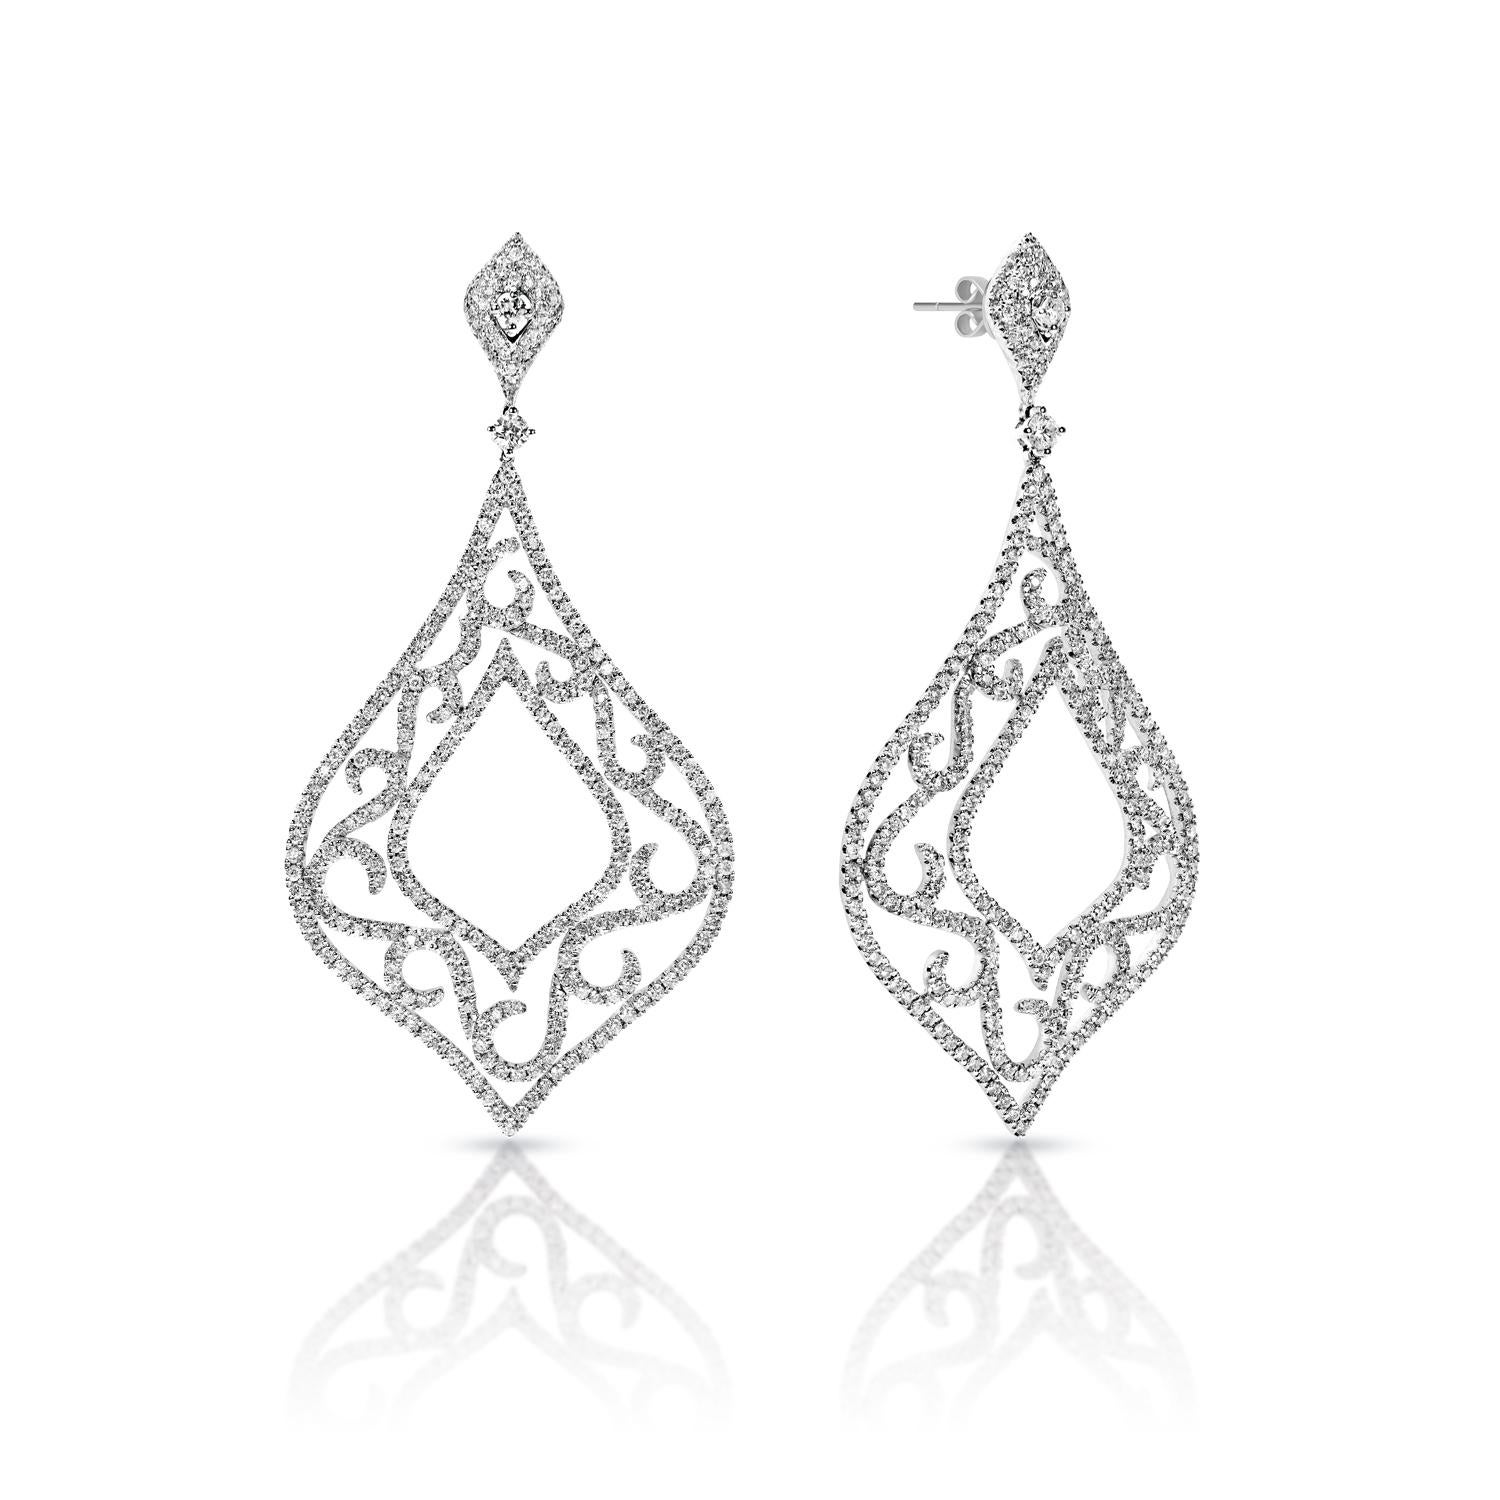 Round Cut 4 Carat Round Briliant Diamond Hanging Earrings Certified For Sale